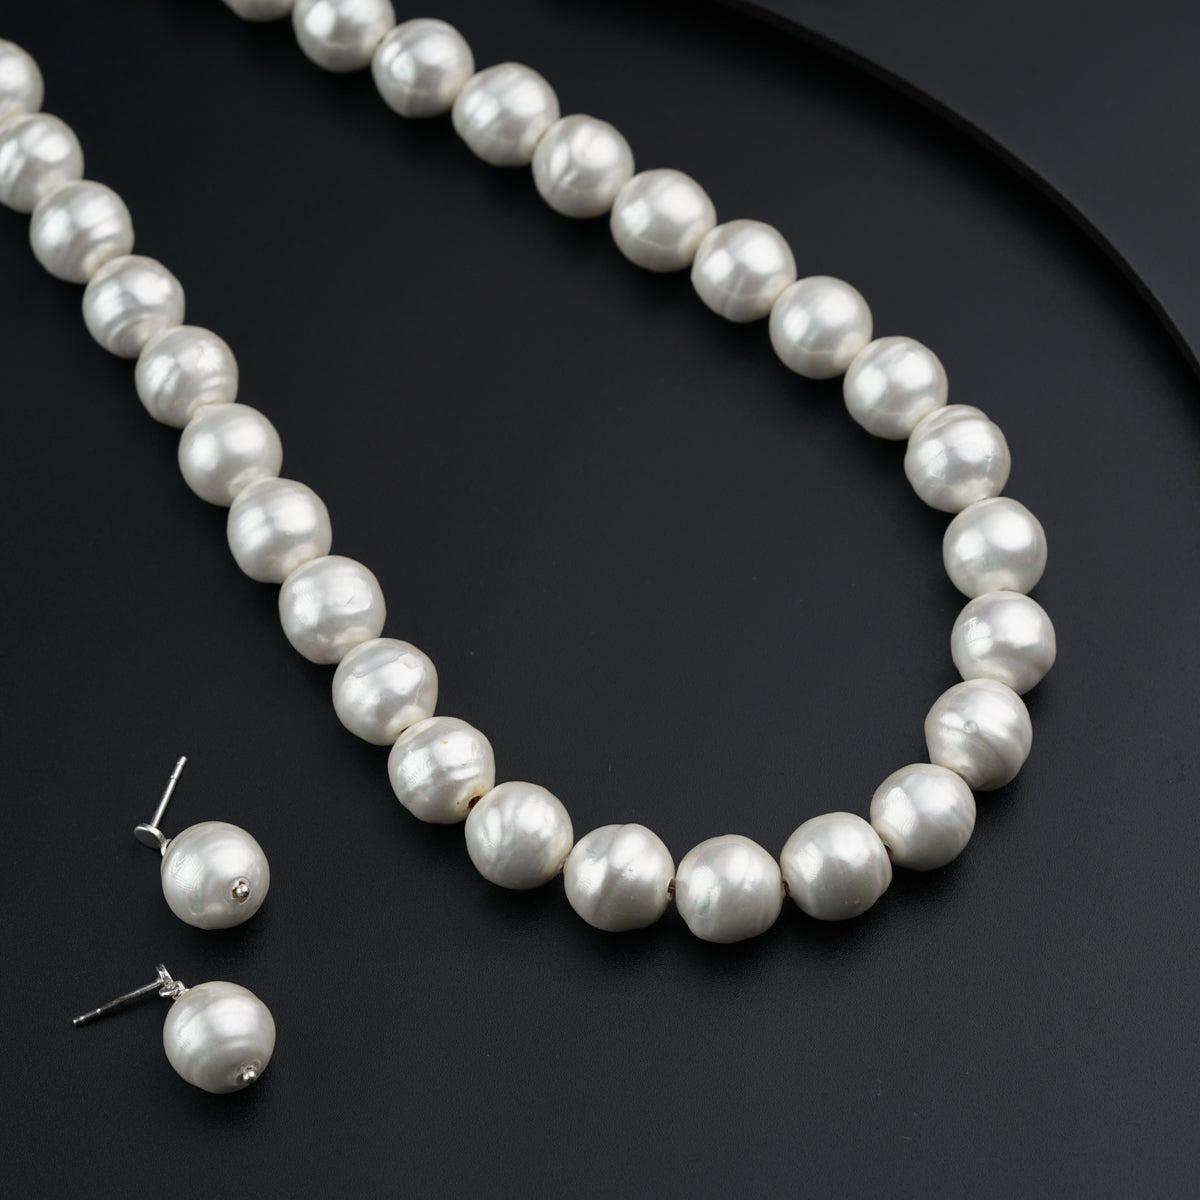 a white pearl necklace and earrings on a black surface